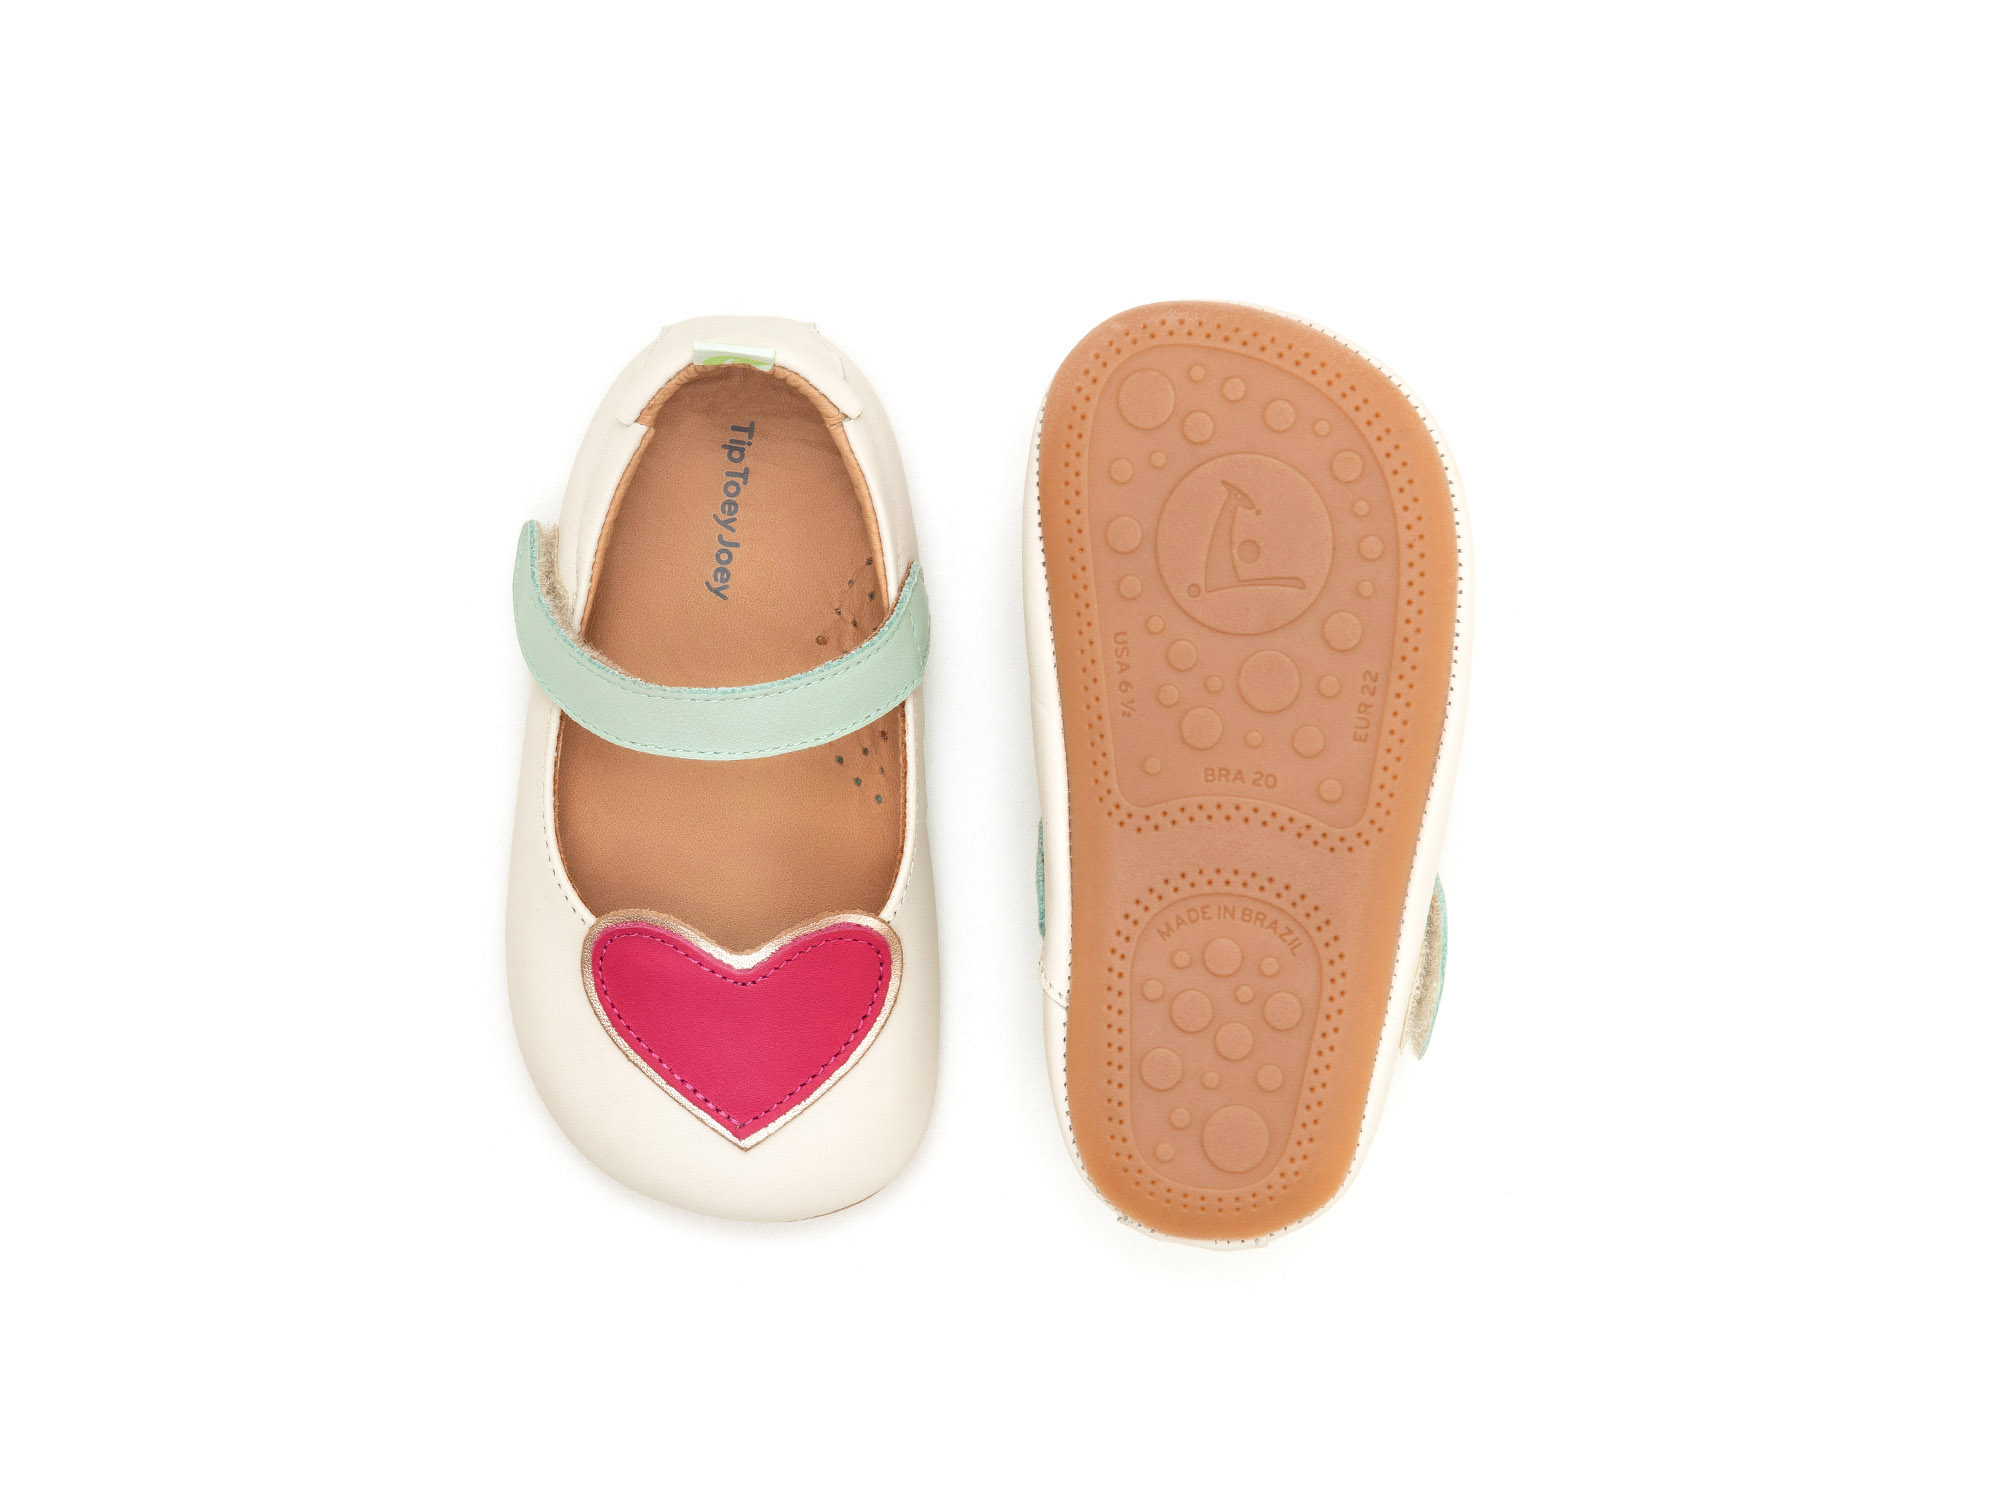 UP & GO Mary Janes for Girls Hearty | Tip Toey Joey - Australia - 2